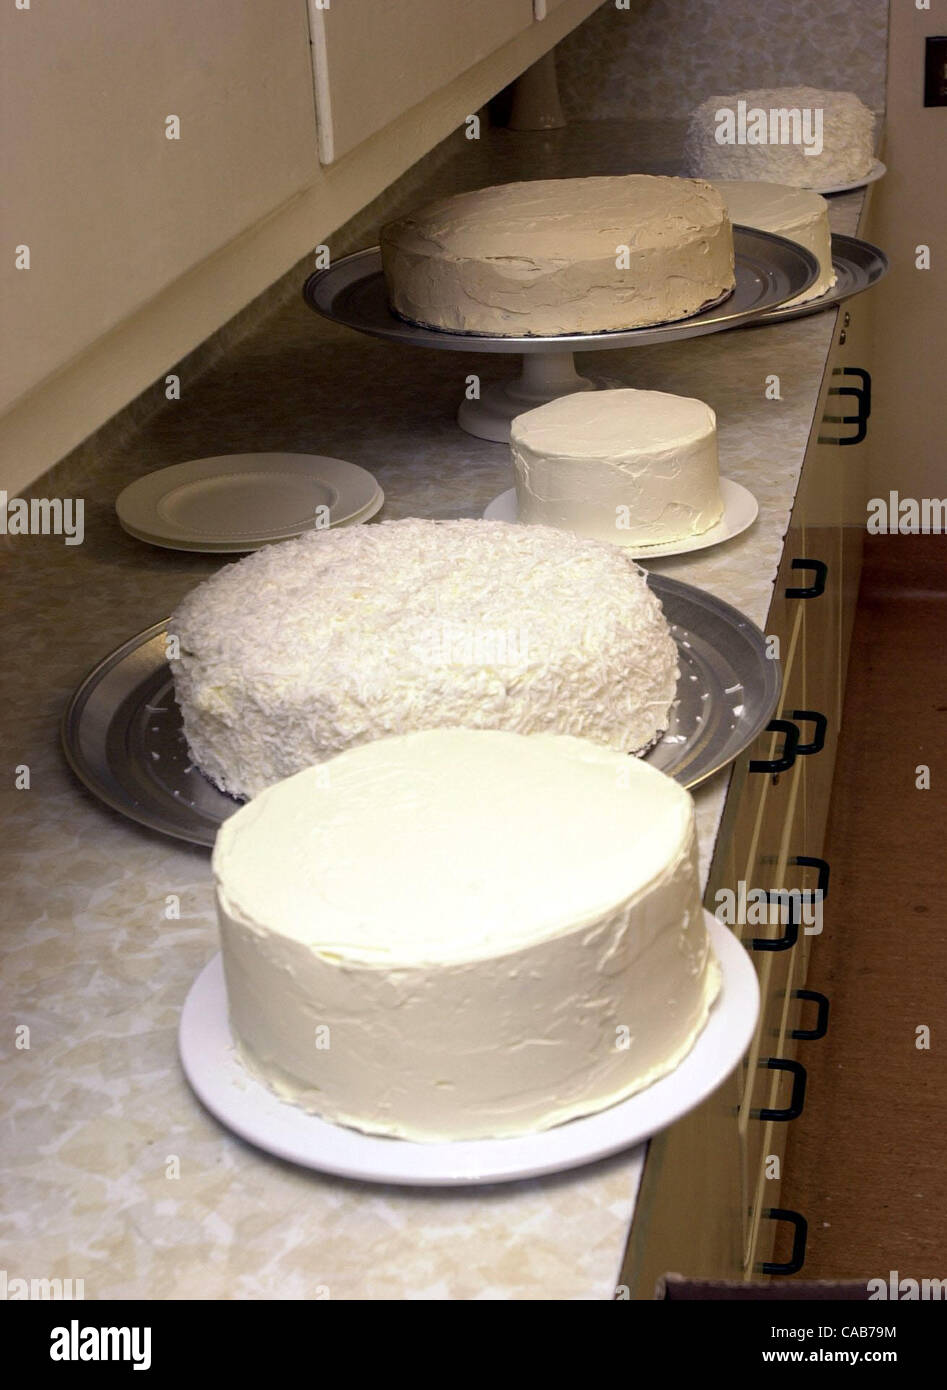 Eileen Kilmartin's three wedding cakes wait for her to assemble them before her wedding in Mill Valley, Calif., on Sunday, May 09, 2004. (CONTRA COSTA TIMES/EDDIE LEDESMA) Stock Photo